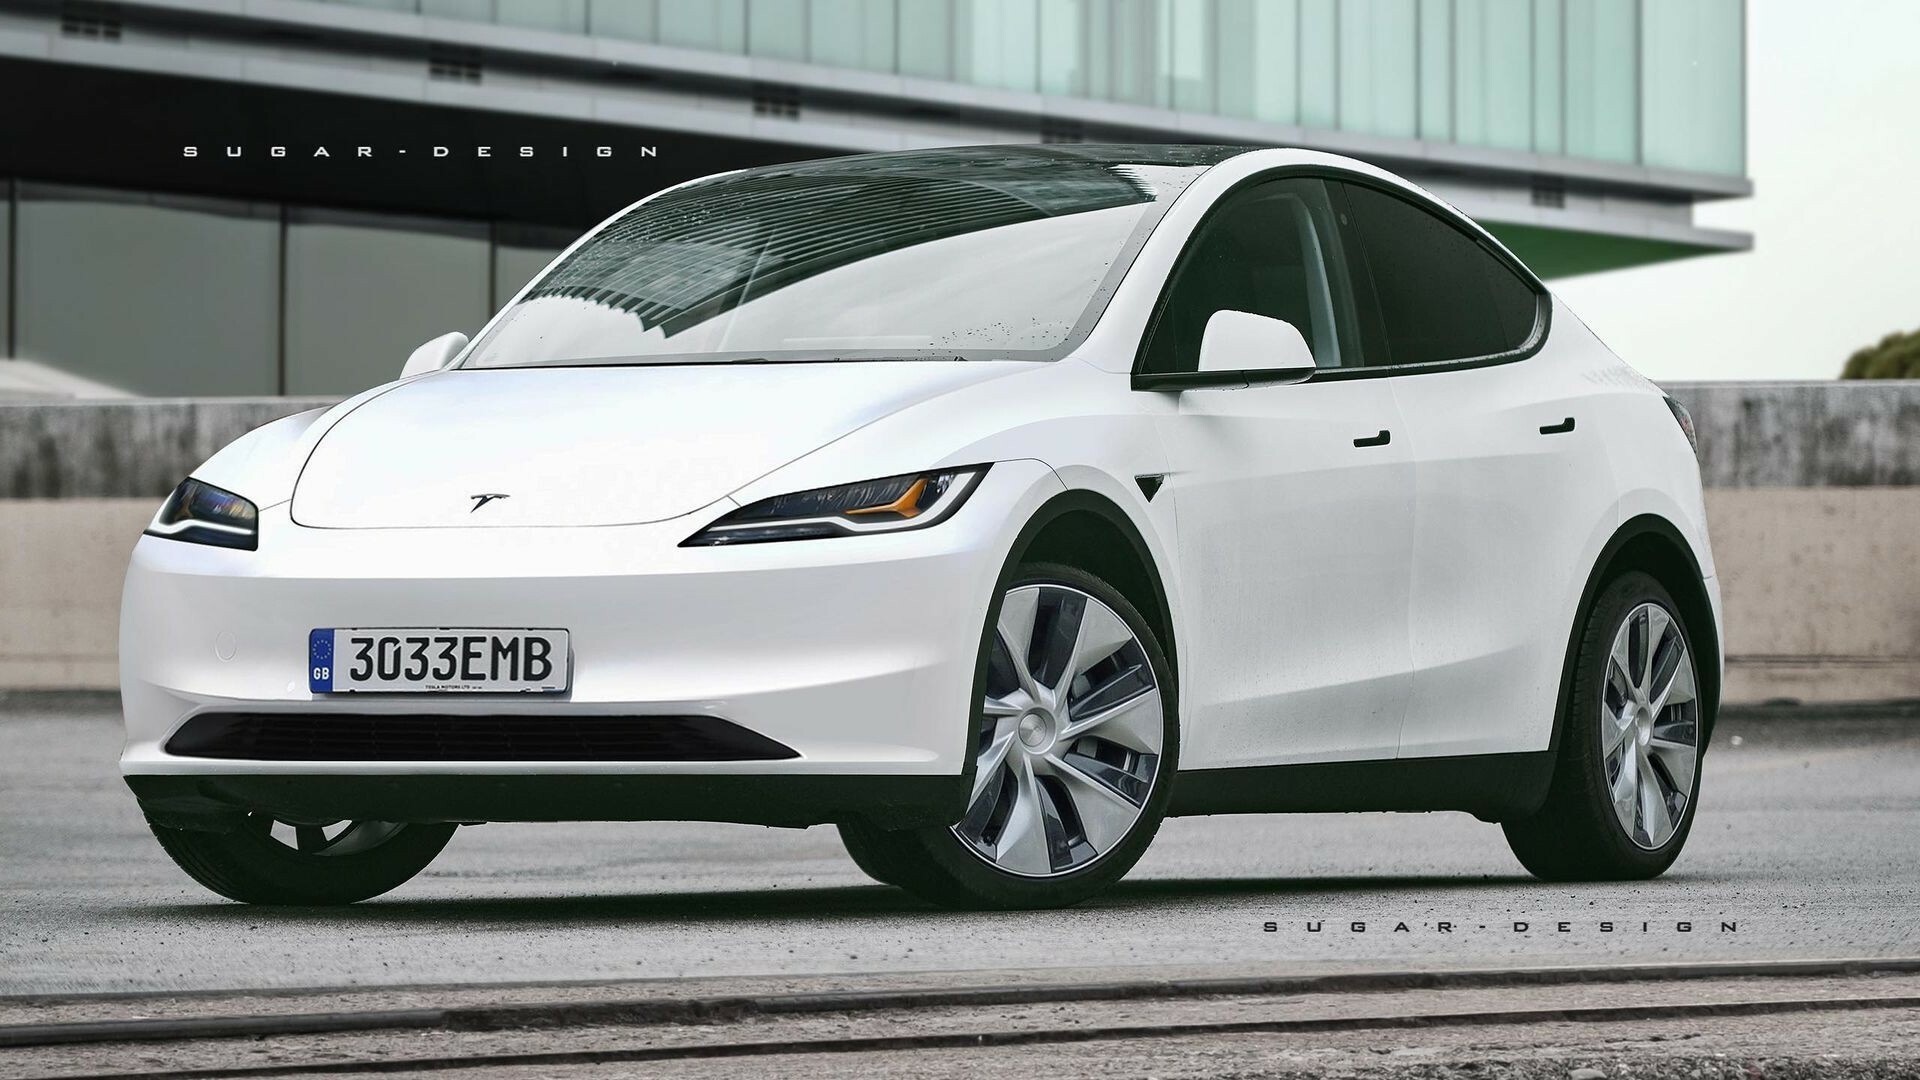 The Tesla Model Y is ready to change: This is what it will look like